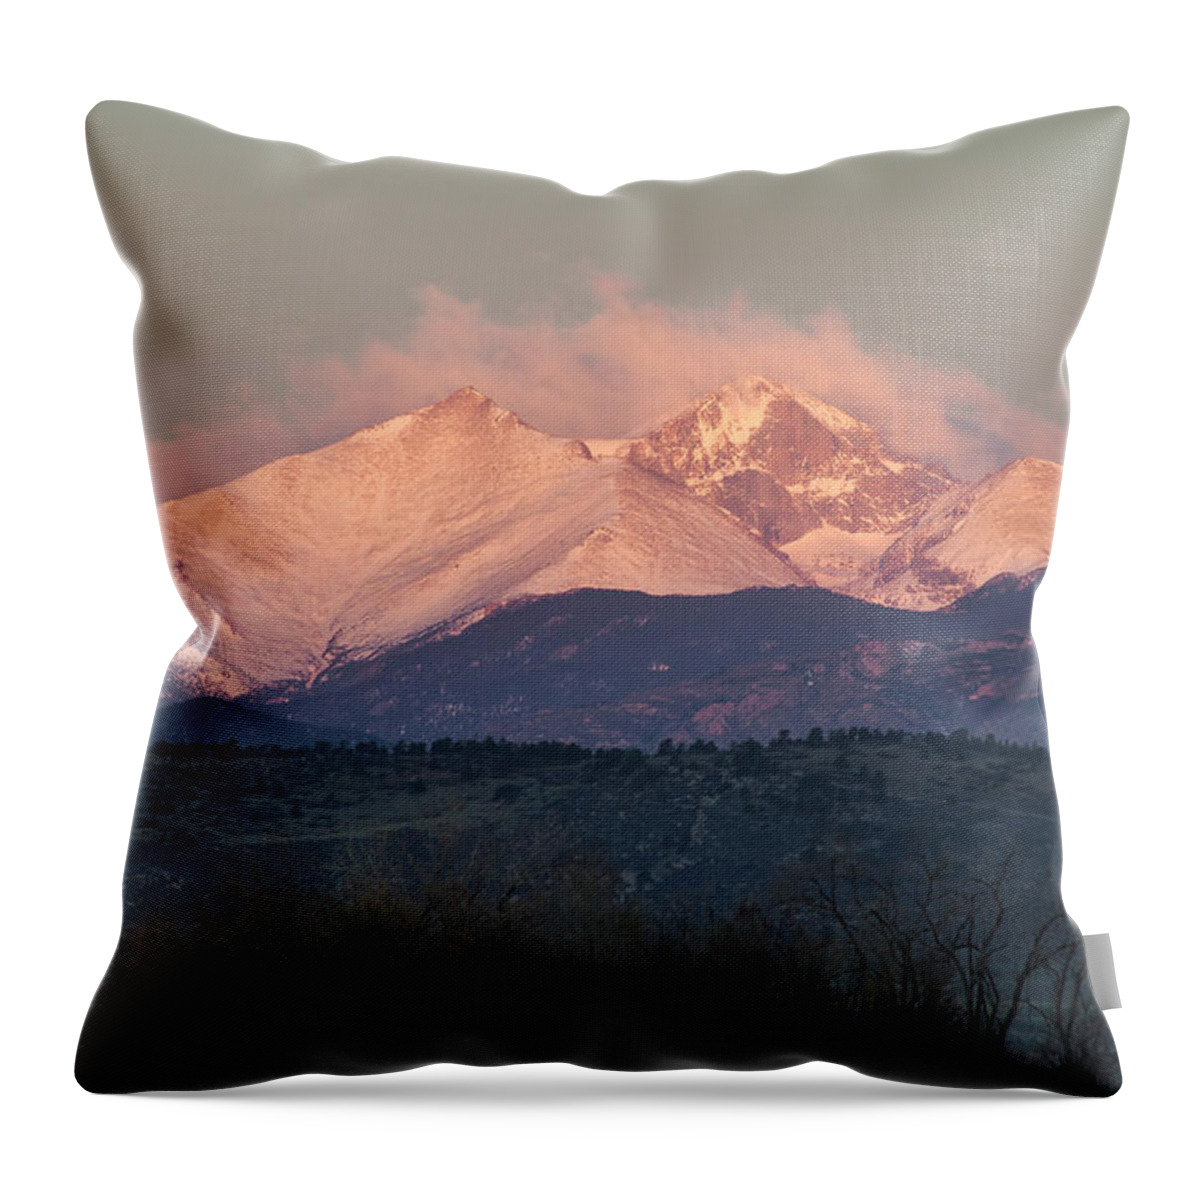 Longs Throw Pillow featuring the photograph Longs Peak 1 by Aaron Spong